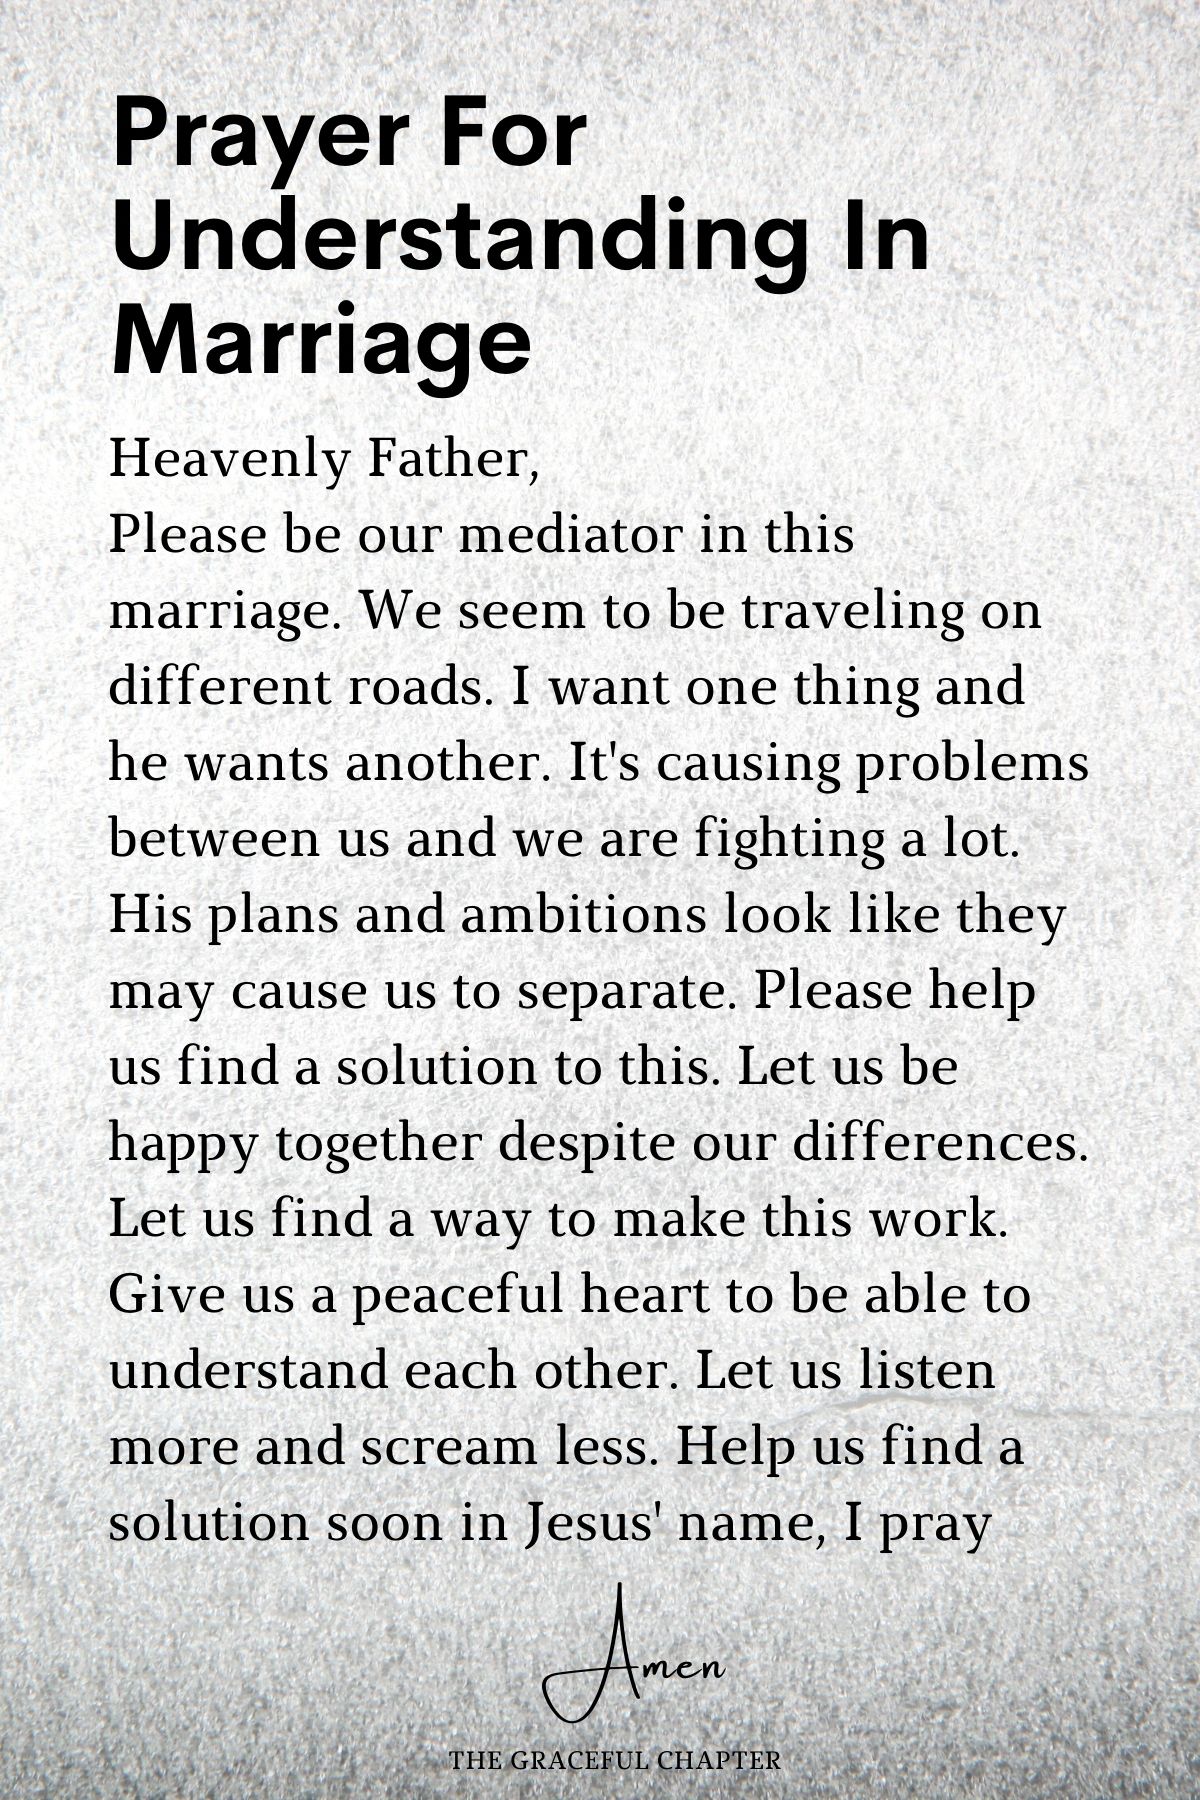 Prayer for understanding in marriage - prayers for marriage restoration